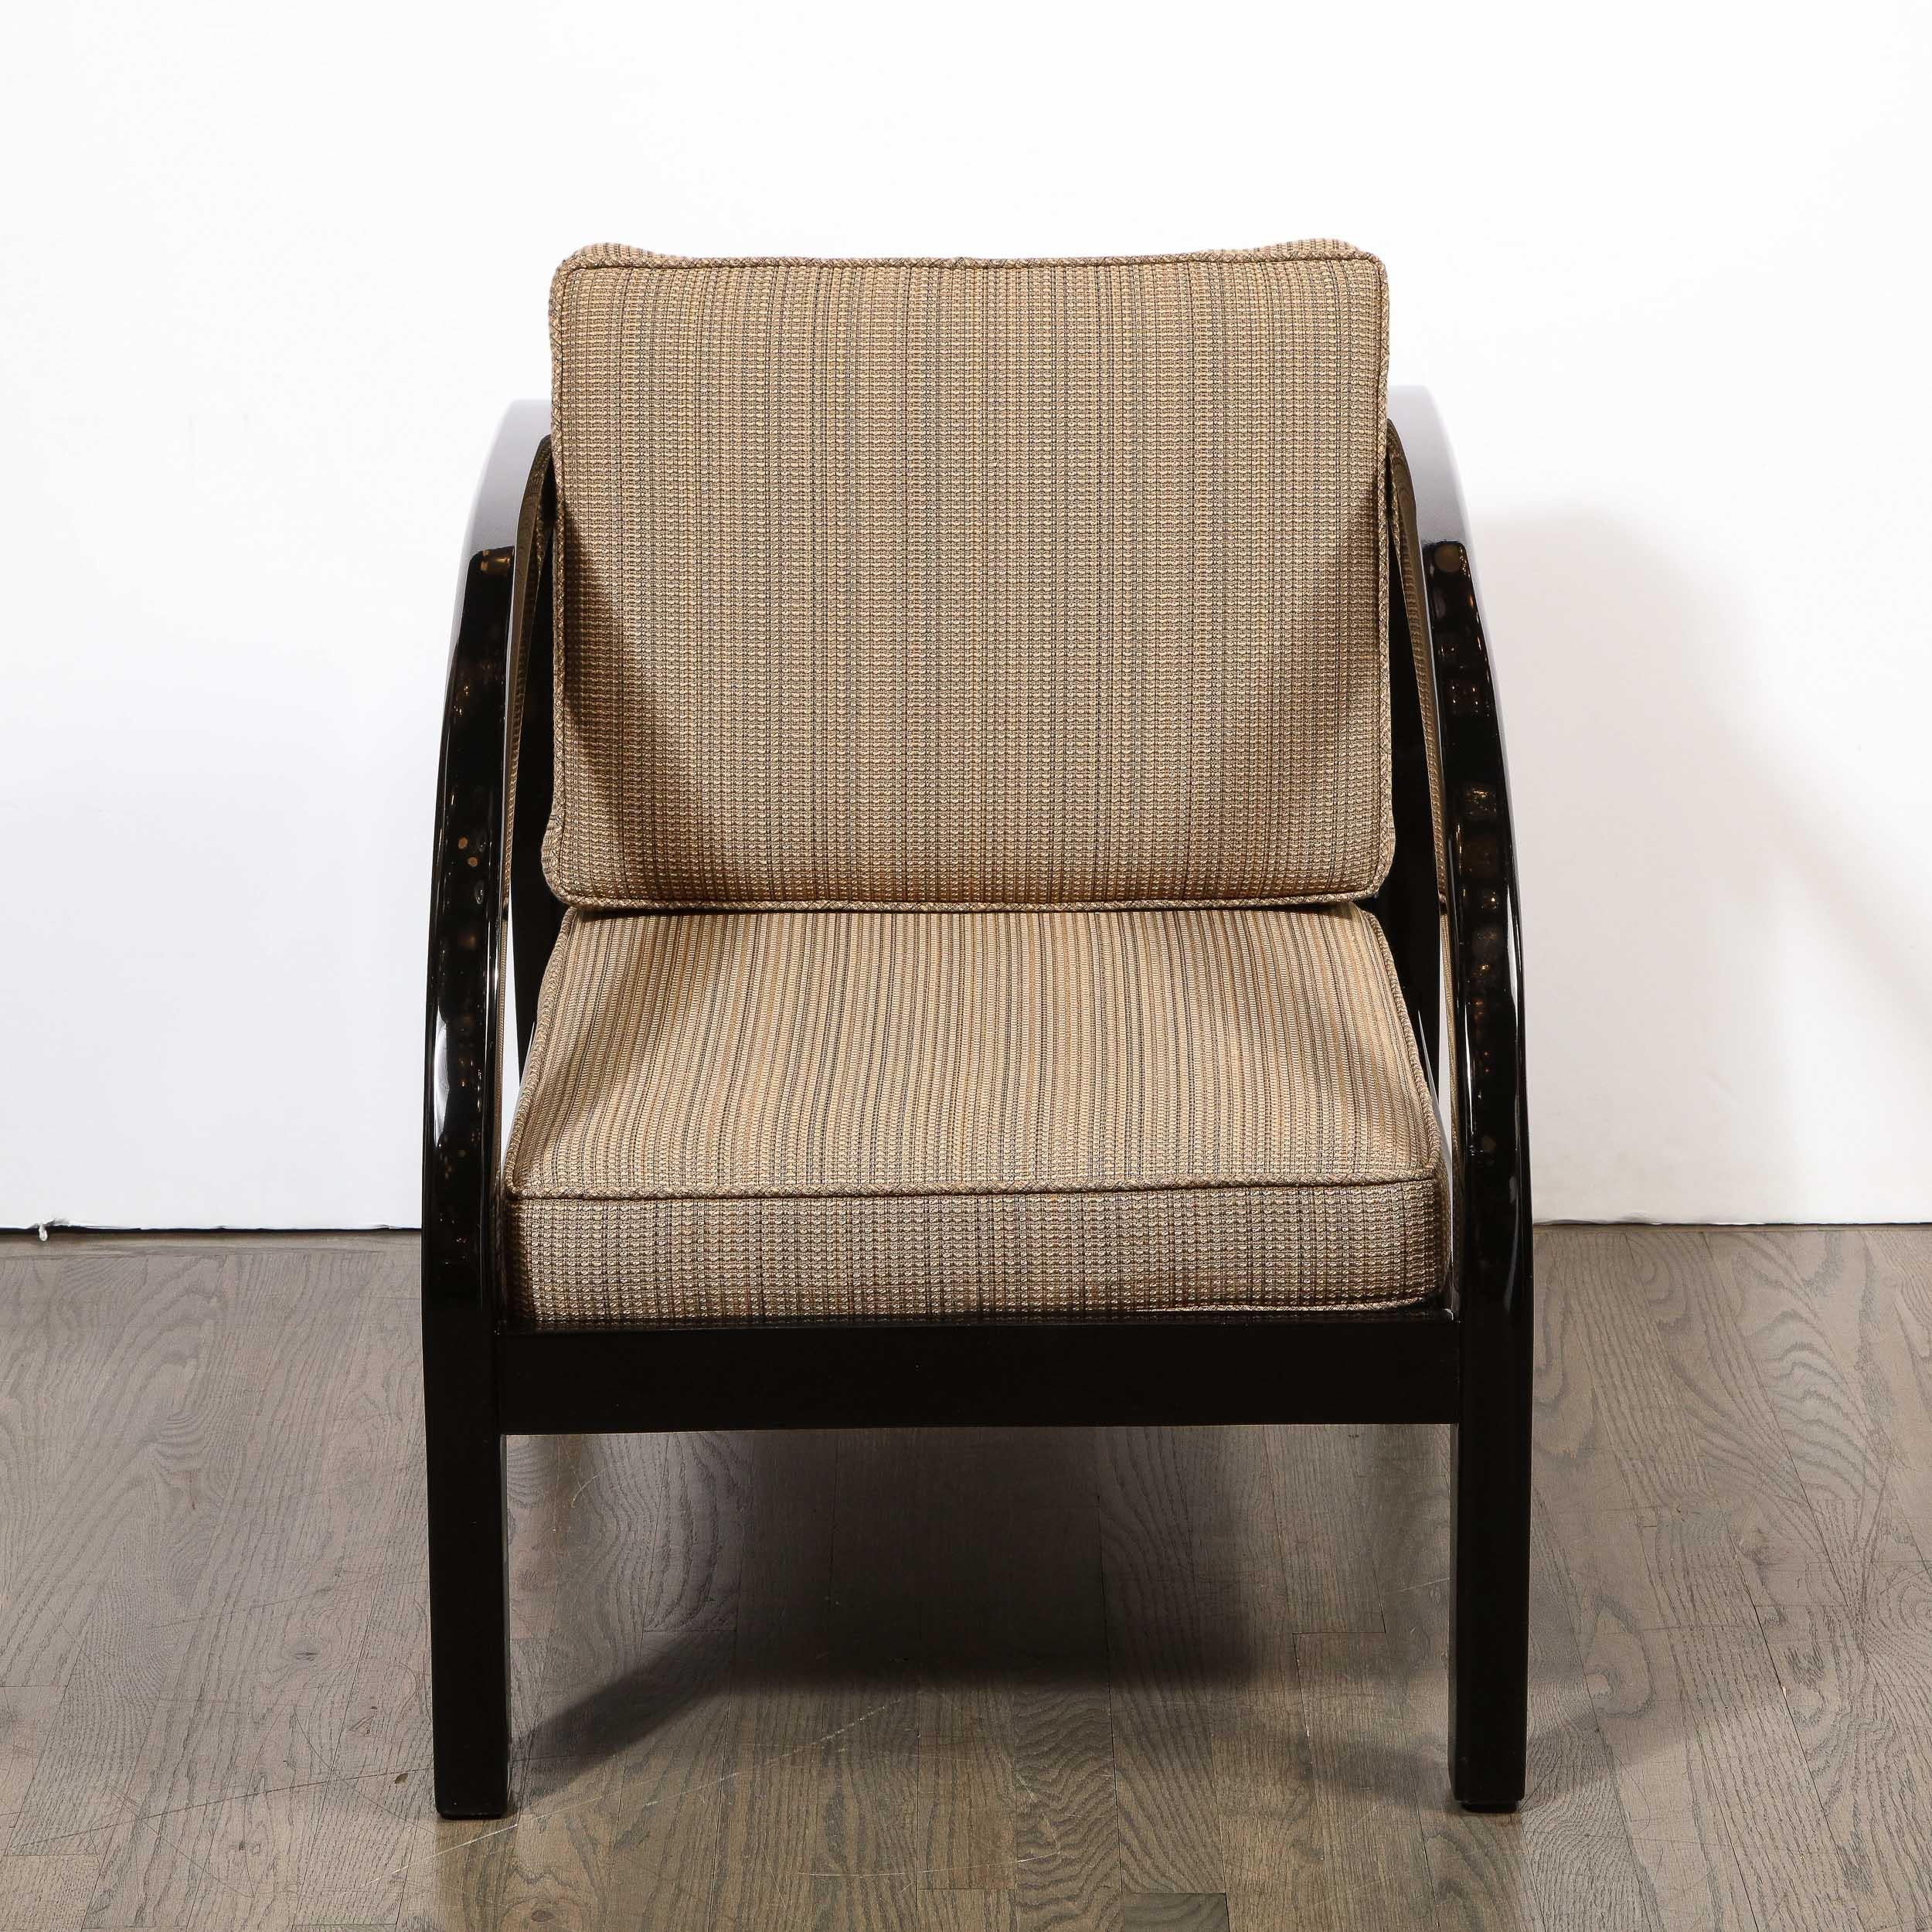 This elegant Art Deco chair was realized by the esteemed maker Modernage Co. in the United States, circa 1930. It features streamlined arms; a volumetric rectangular legs; and a geometric rectangular back with a support slat down the center- all in